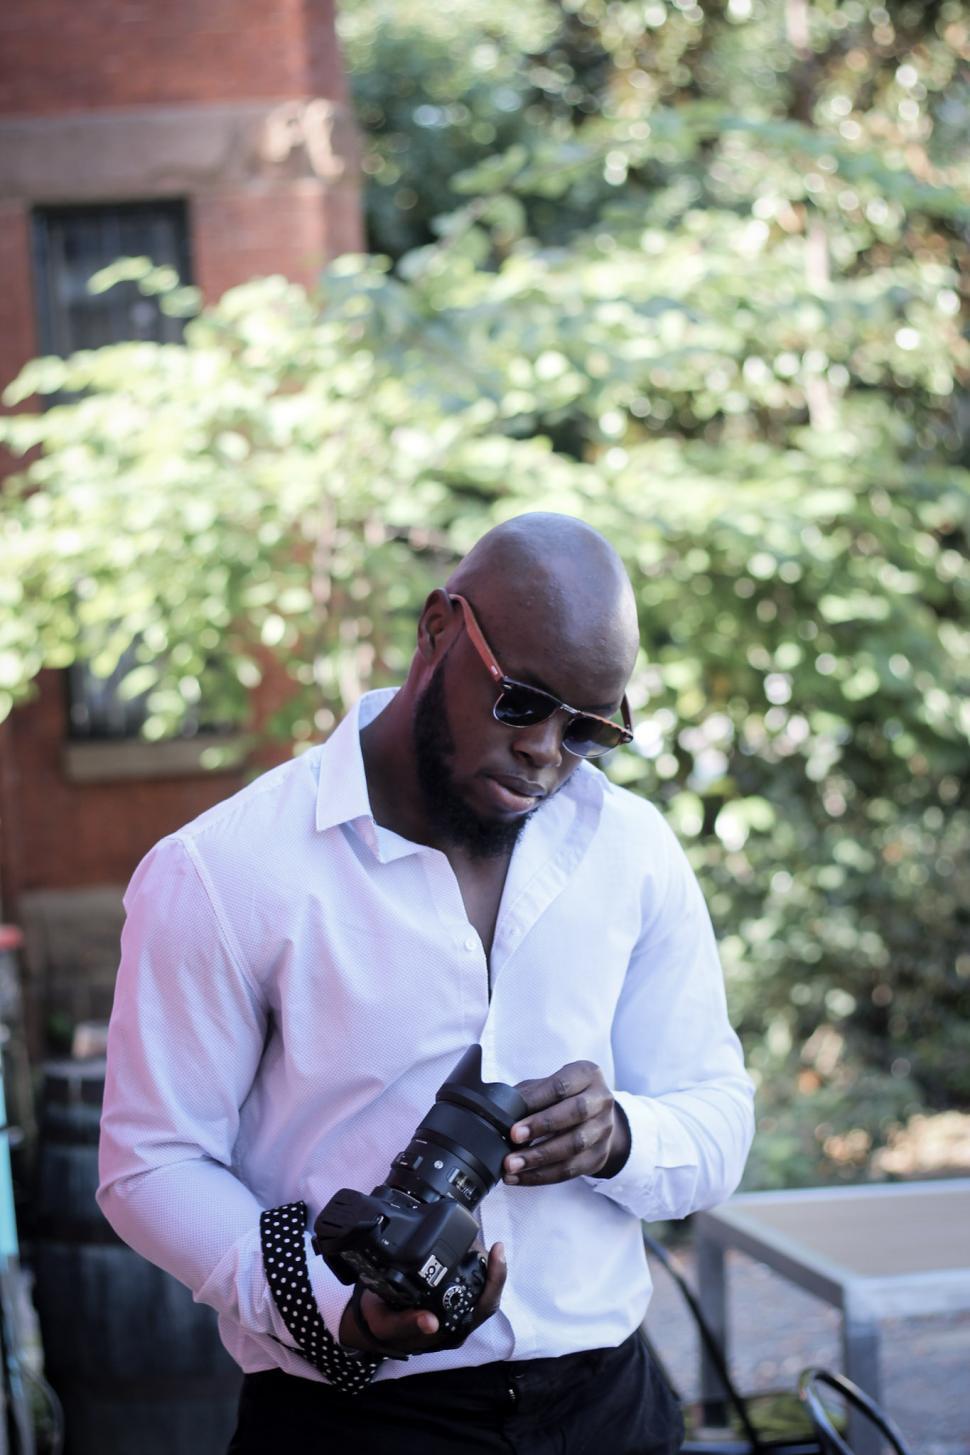 Free Image of Young Bald Man in white shirt holding DSLR camera 